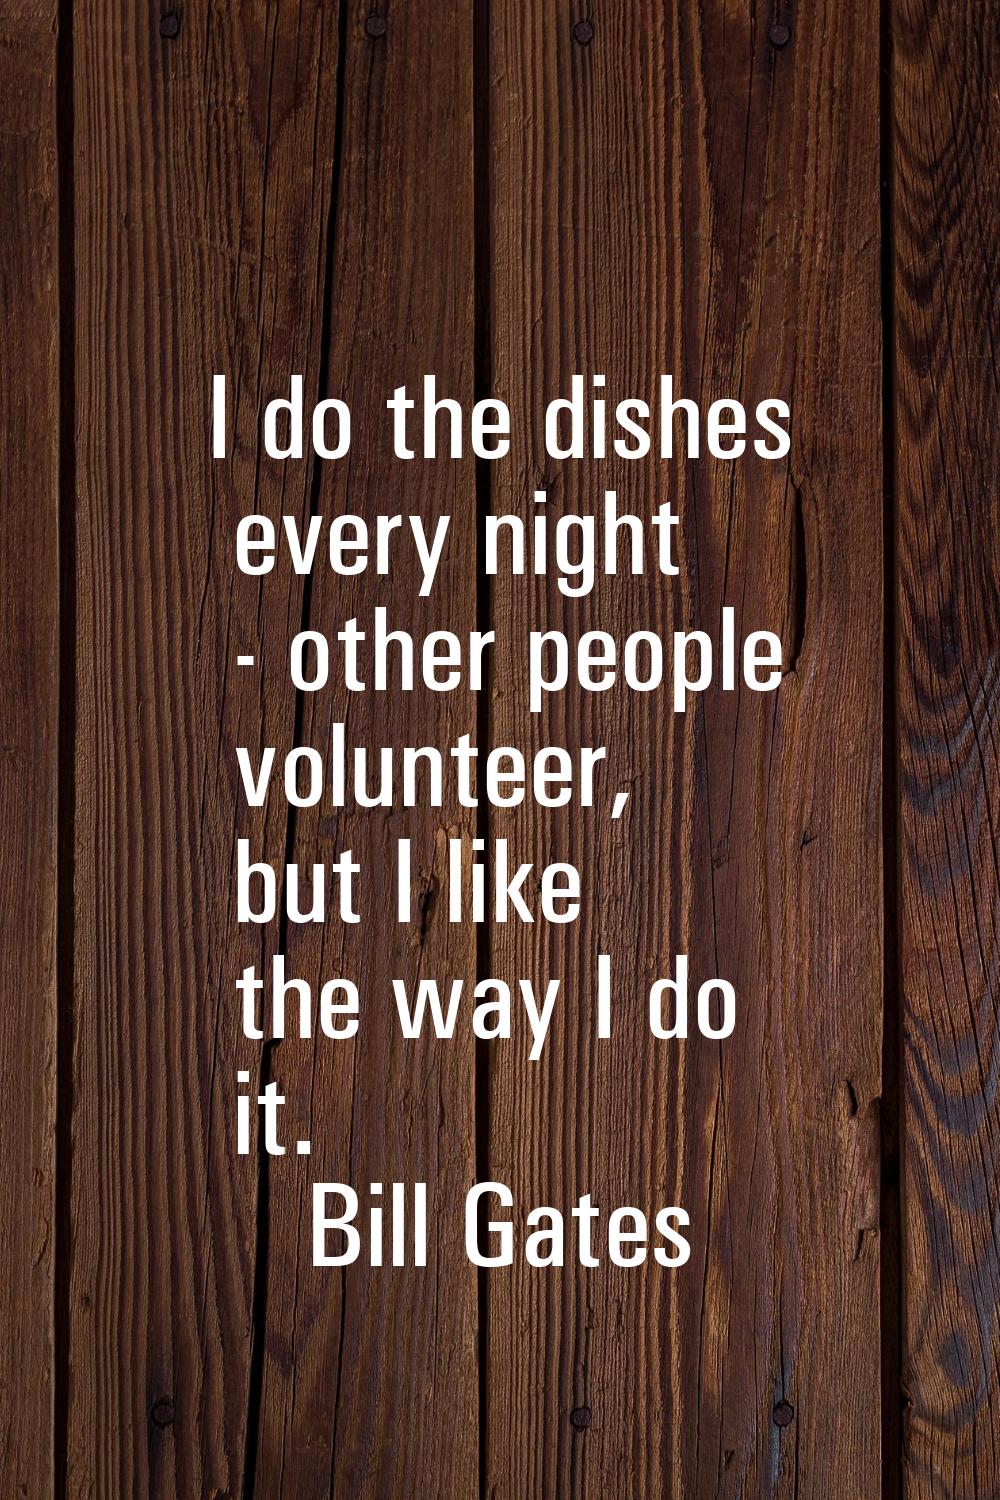 I do the dishes every night - other people volunteer, but I like the way I do it.